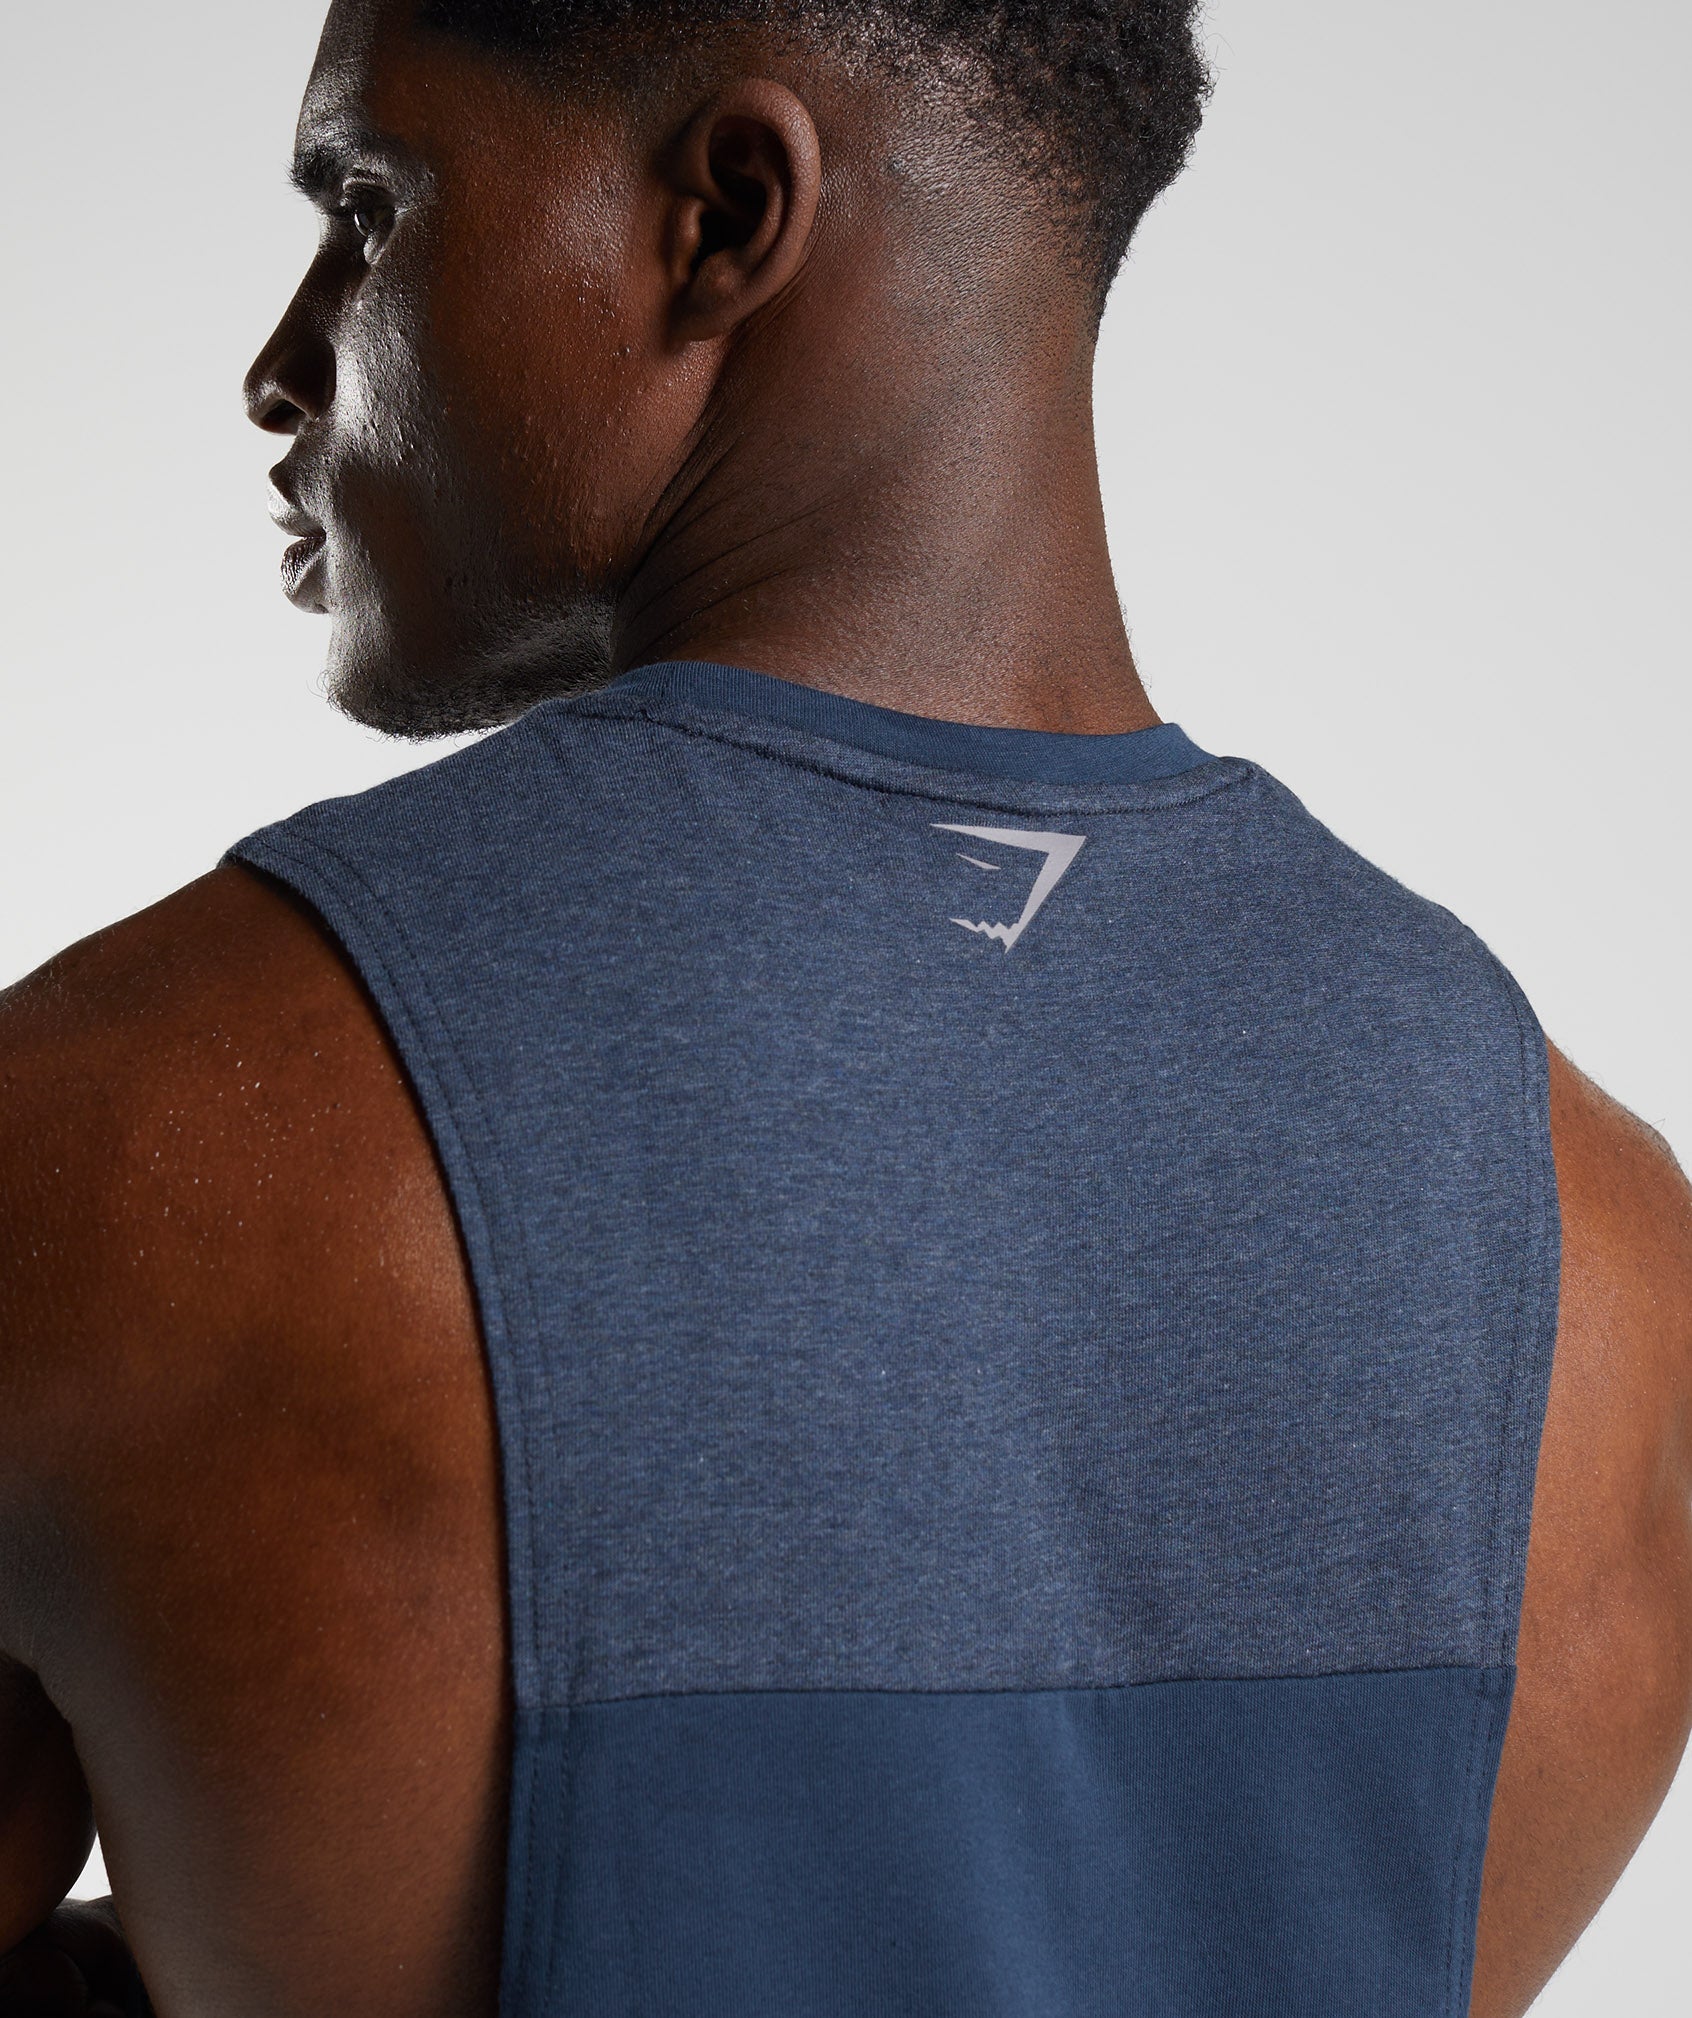 Bold React Drop Arm Tank in Navy - view 5